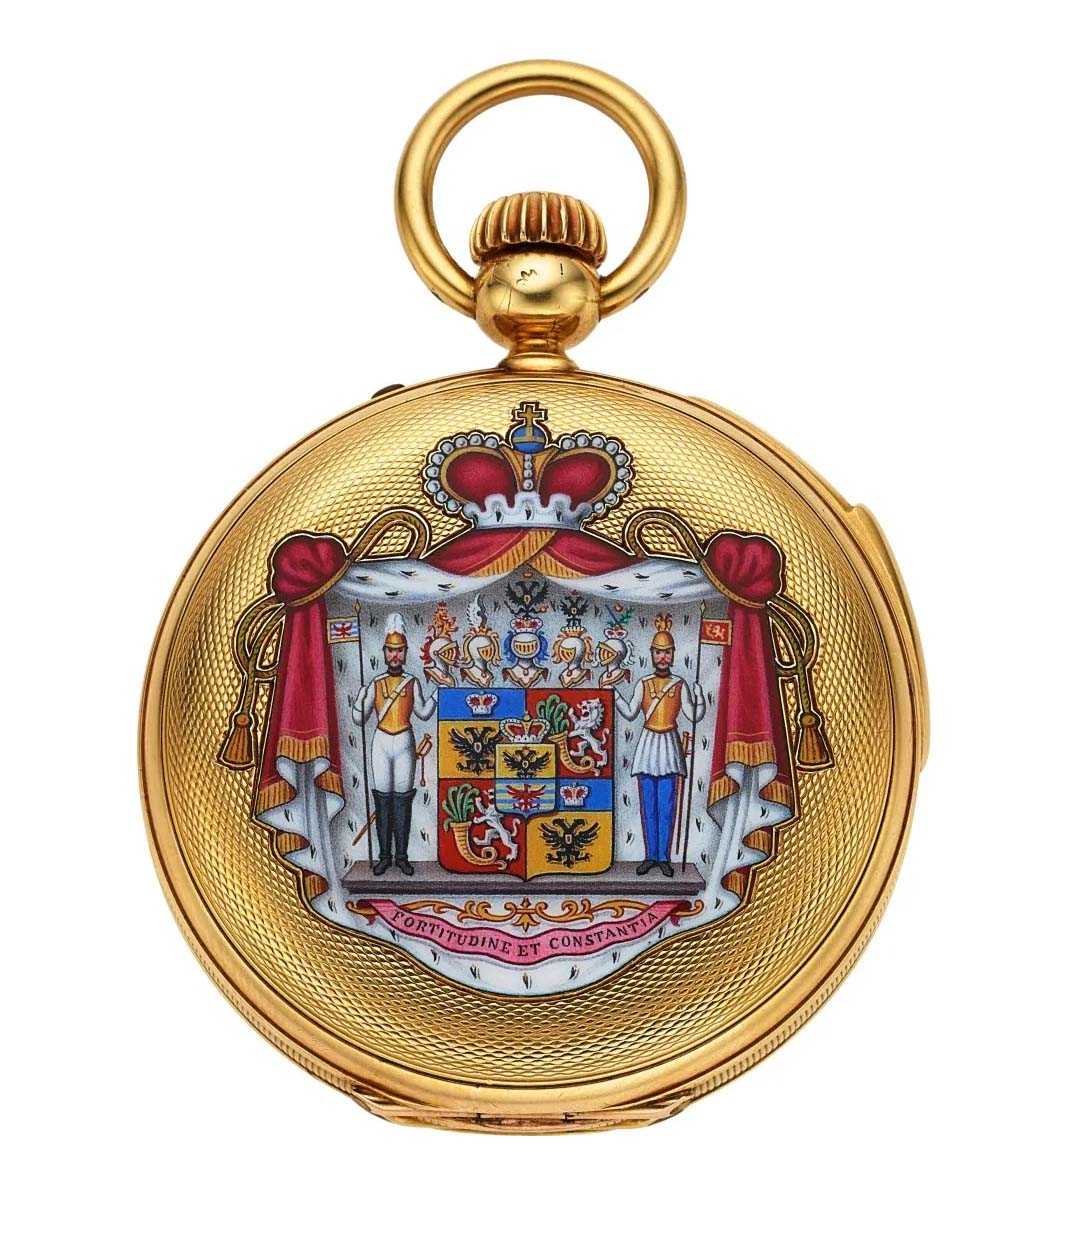 Custom pocket watch for an Imperial Russian prince heads Heritage&#8217;s June 3 sale